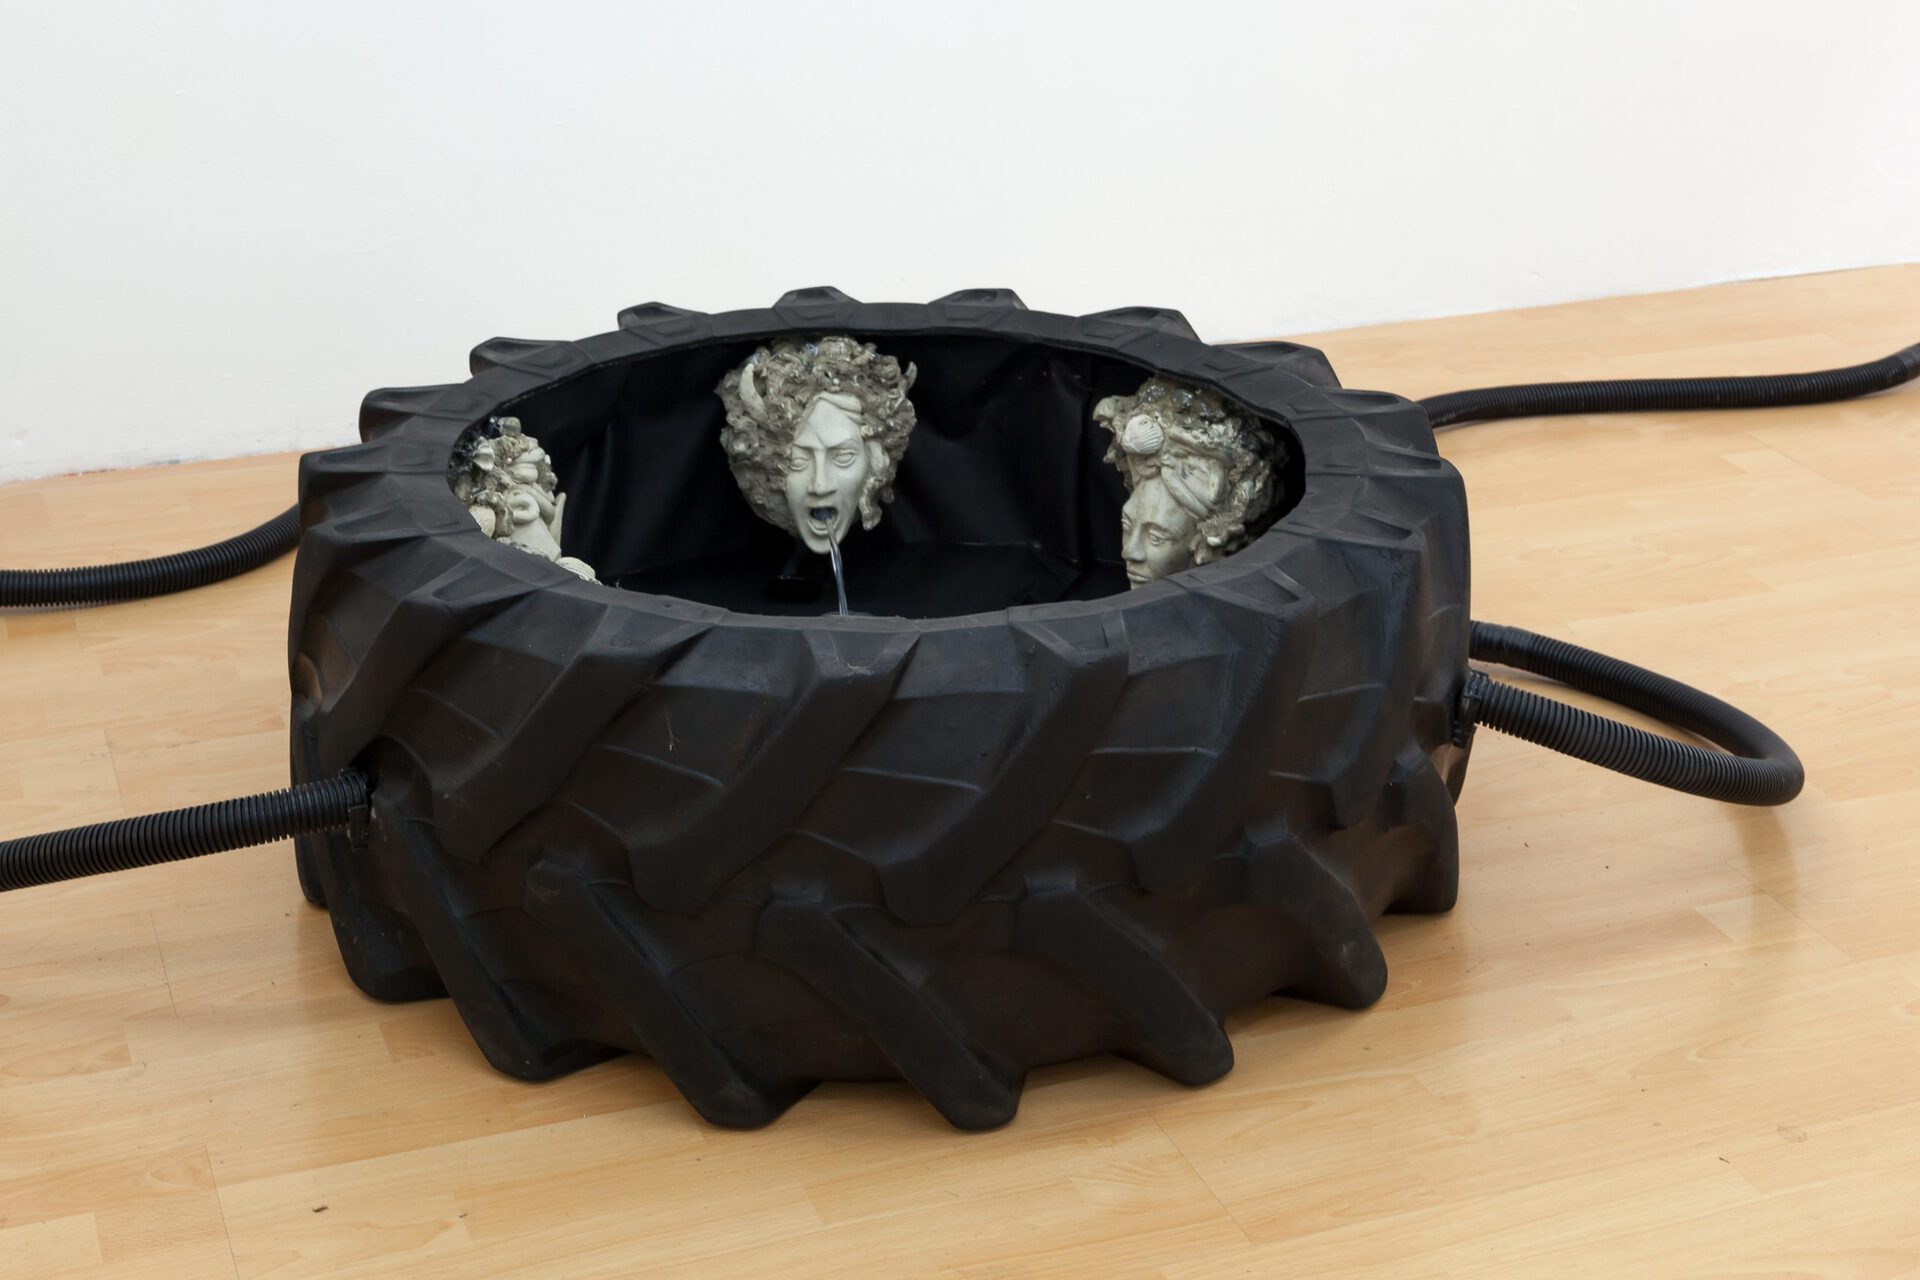 Absolution, 40 x 100 x 100 cm,  tractor tire, cast stone, water, pvc, 2021